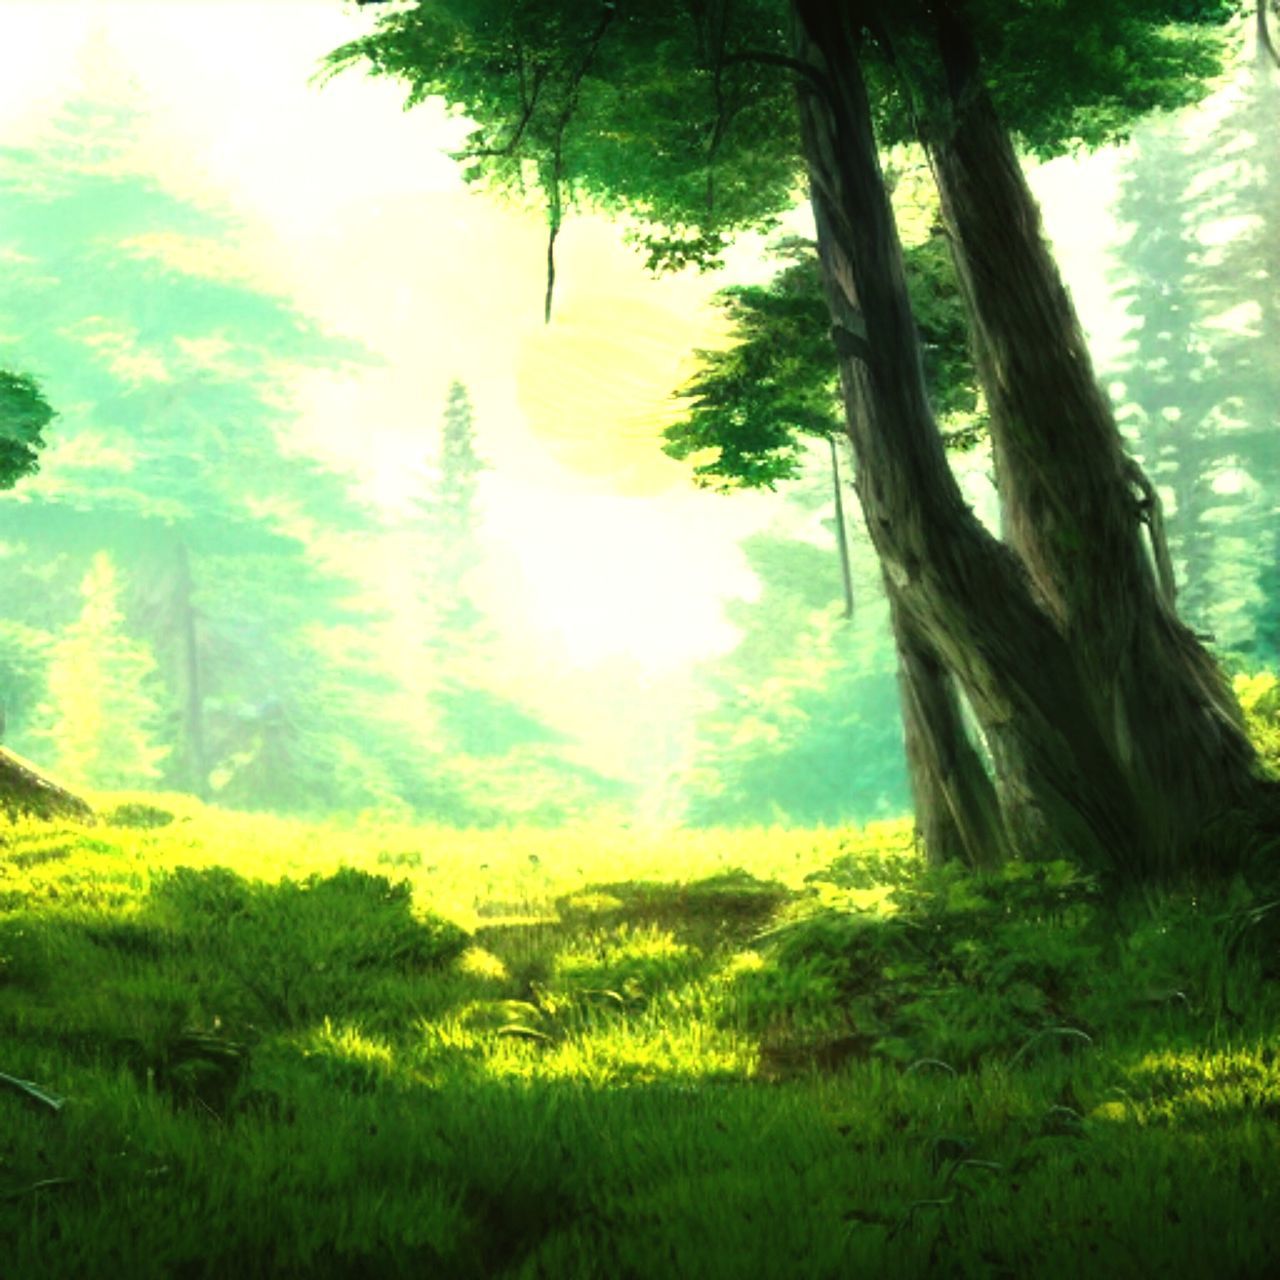 plant, tree, green, sunlight, beauty in nature, land, nature, natural environment, tranquility, growth, environment, tranquil scene, grass, forest, scenics - nature, meadow, no people, landscape, woodland, tree trunk, trunk, day, leaf, morning, non-urban scene, outdoors, painting, sky, foliage, idyllic, lush foliage, field, flower, sunbeam, branch, jungle, rural scene